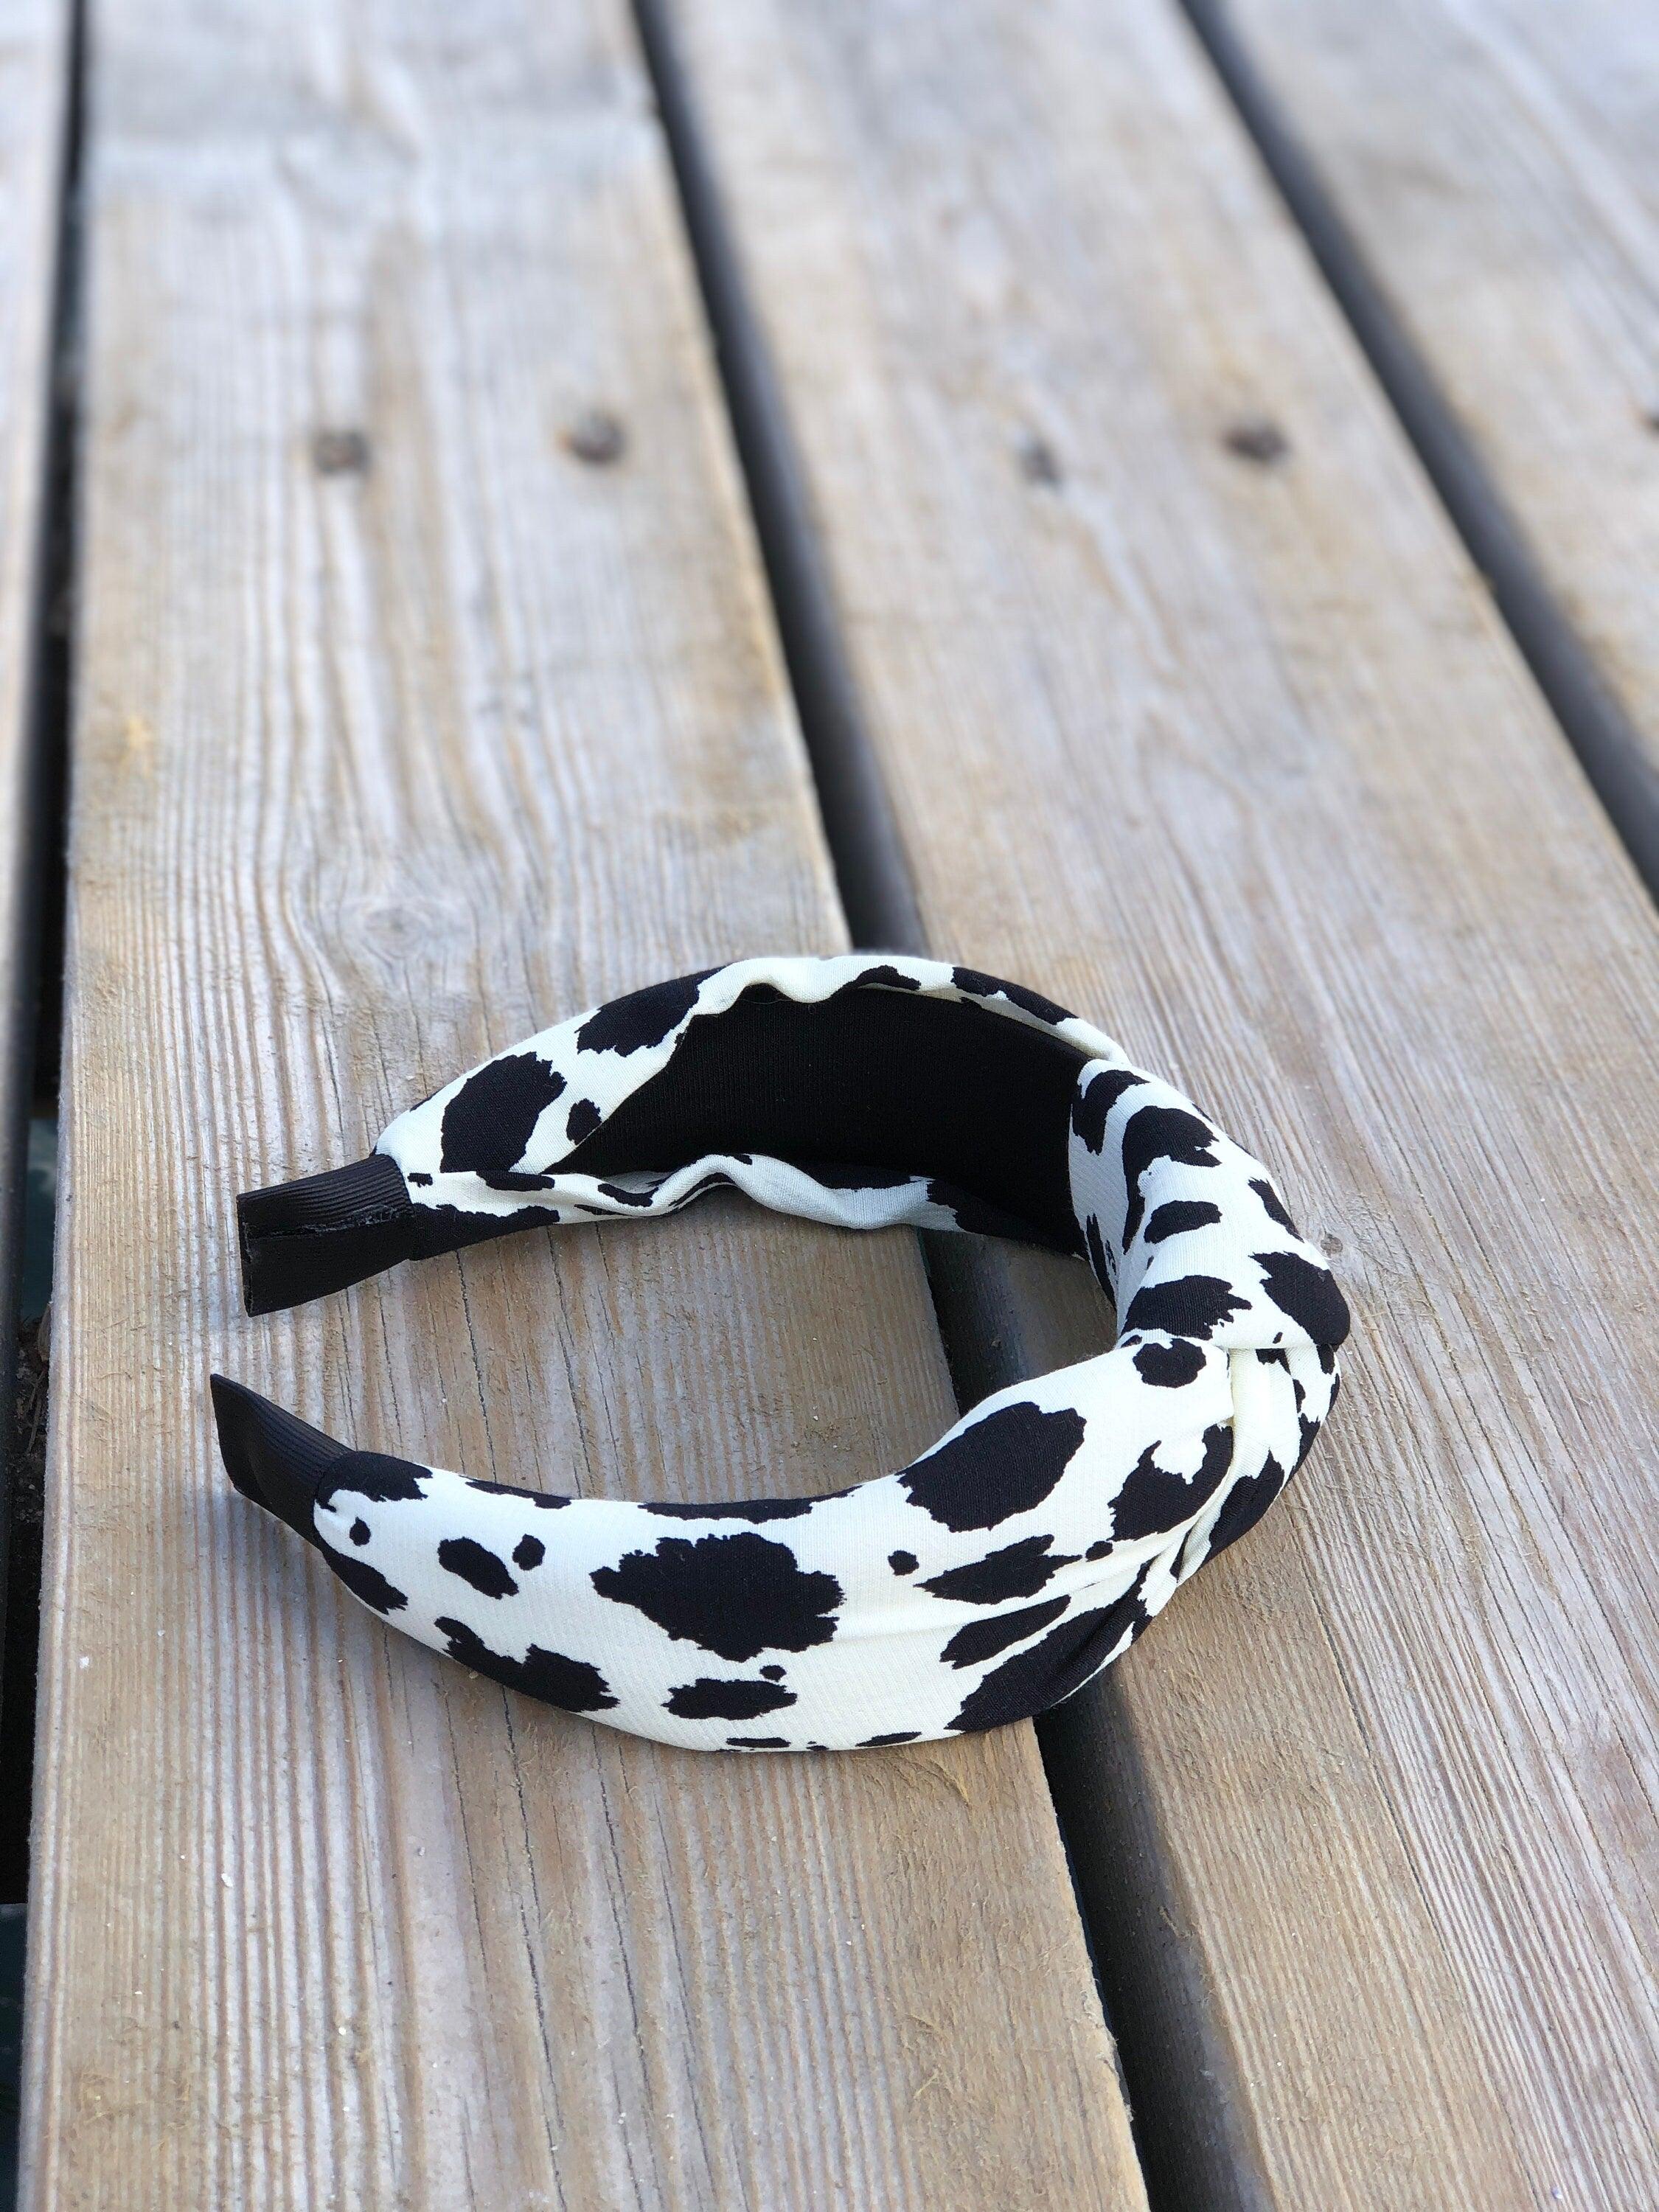 Delicate White Leopard Headband - Stylish African-Inspired Spotted Cotton Headband with Wide Design and Black Bow Accent available at Moyoni Design